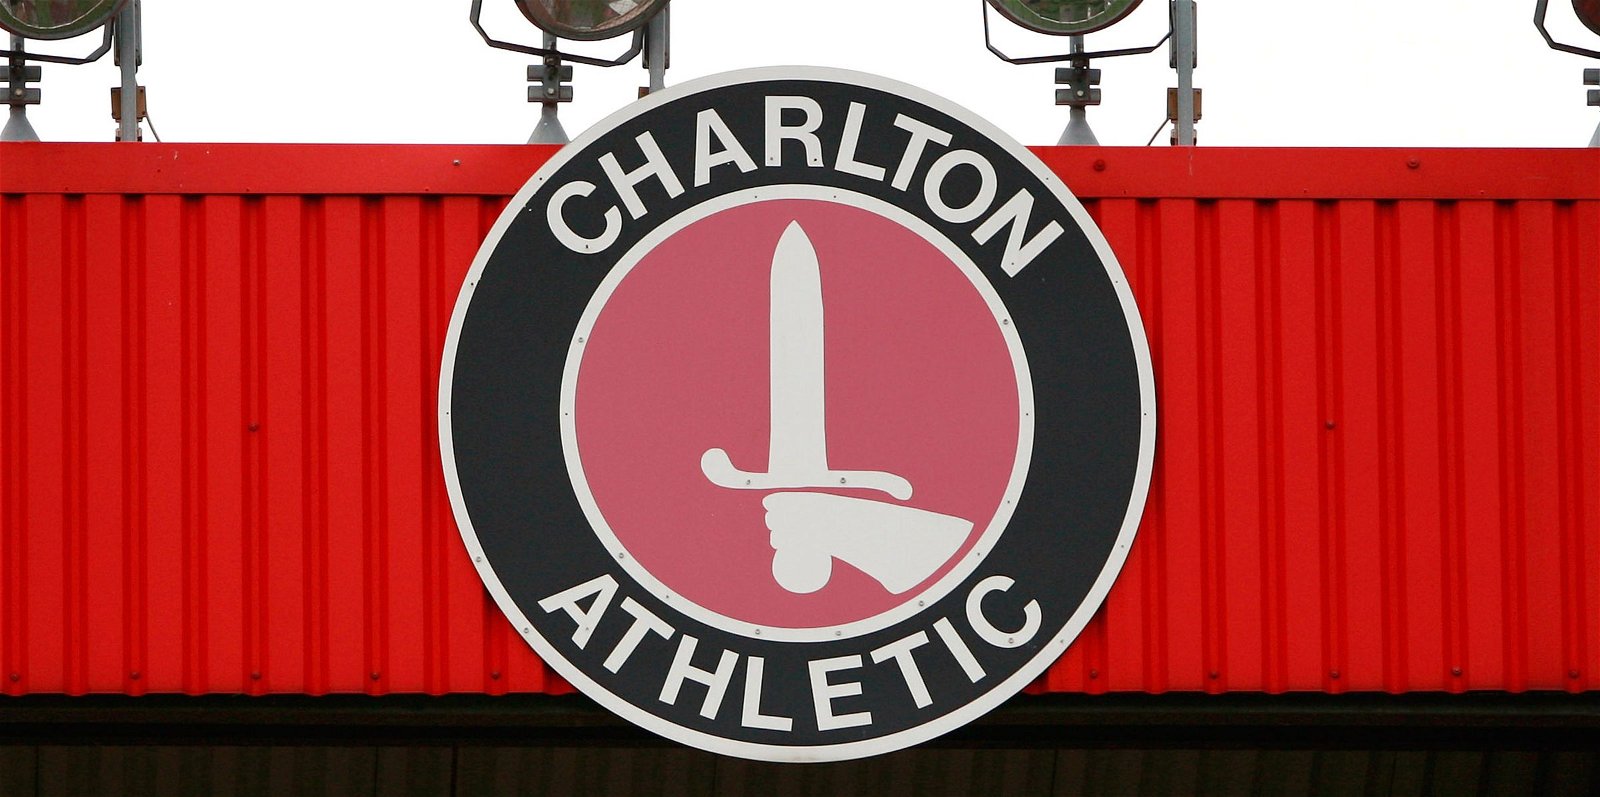 Charlton Athletic, Significant development emerges regarding Charlton Athletic takeover plans